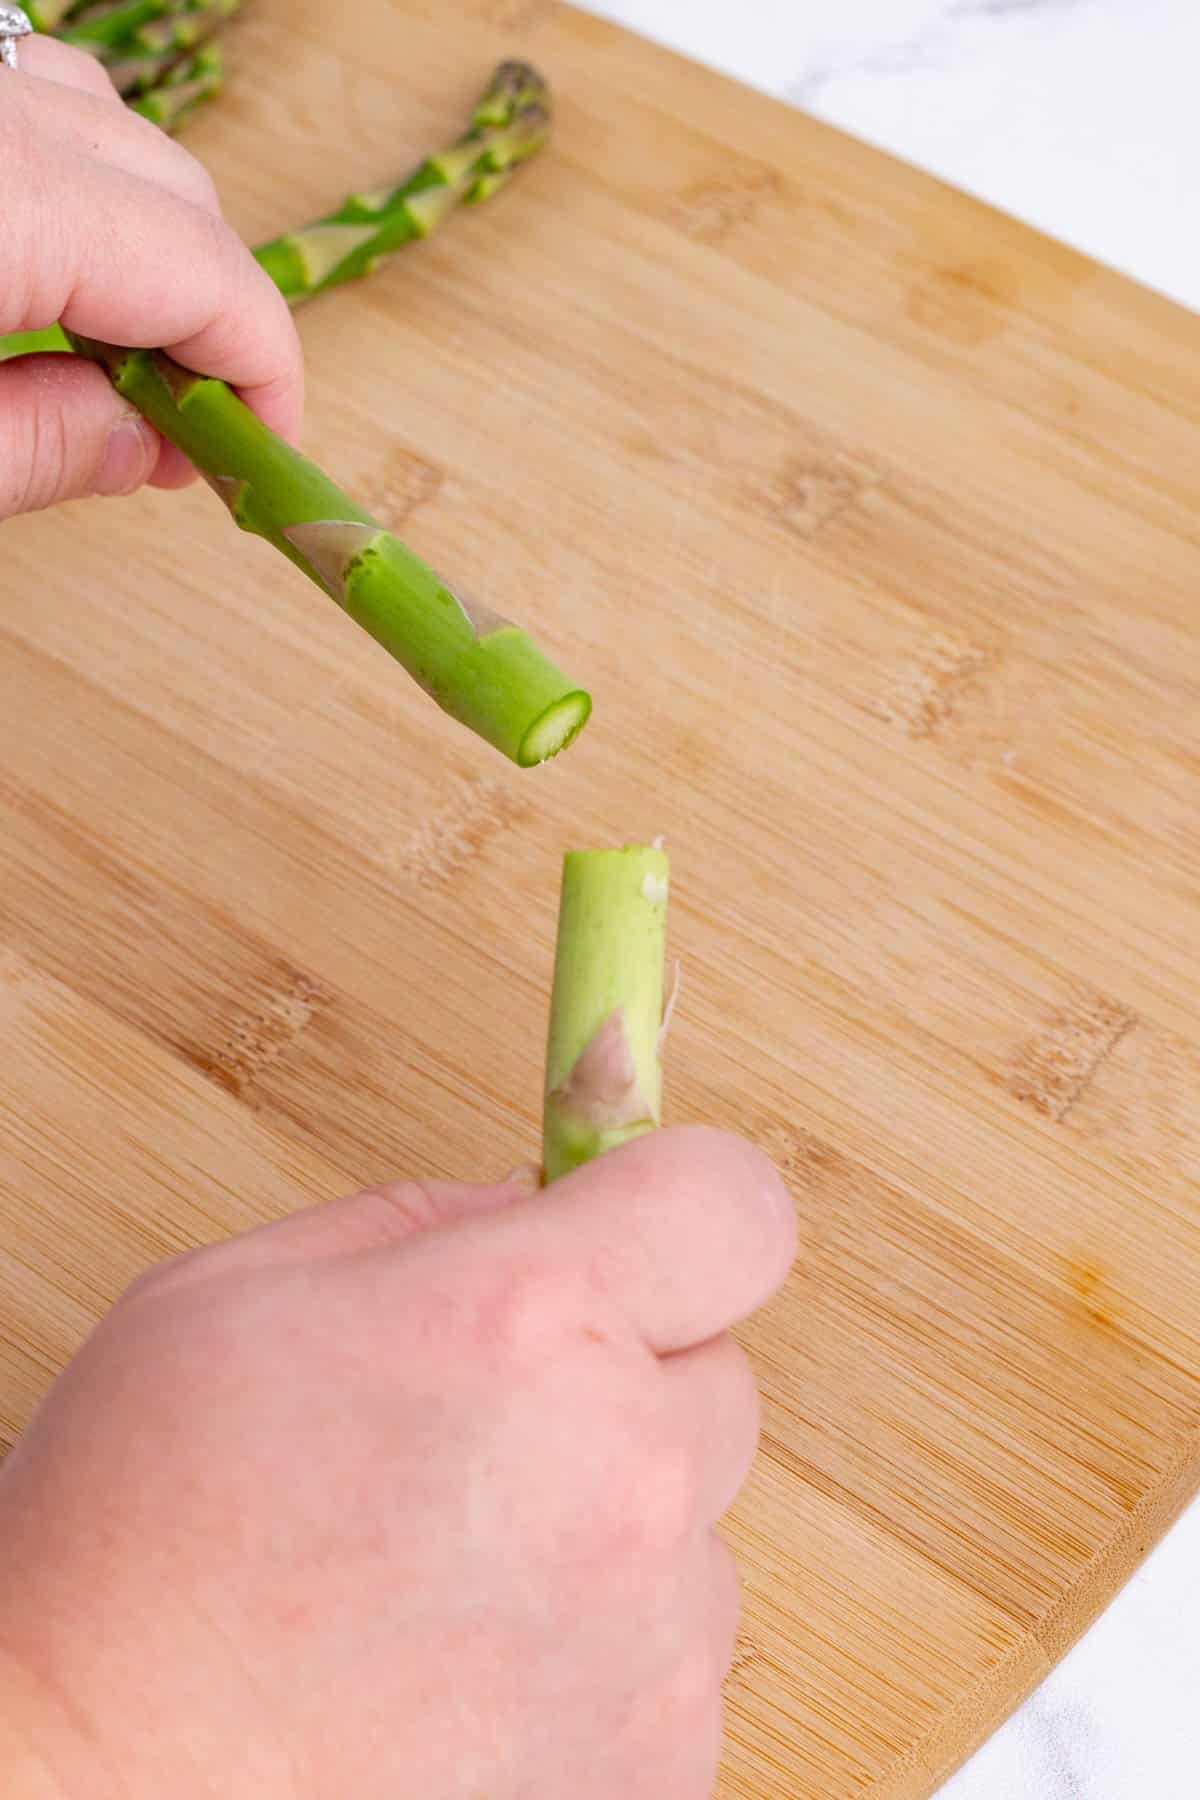 Hands remove the ends of the asparagus spears.